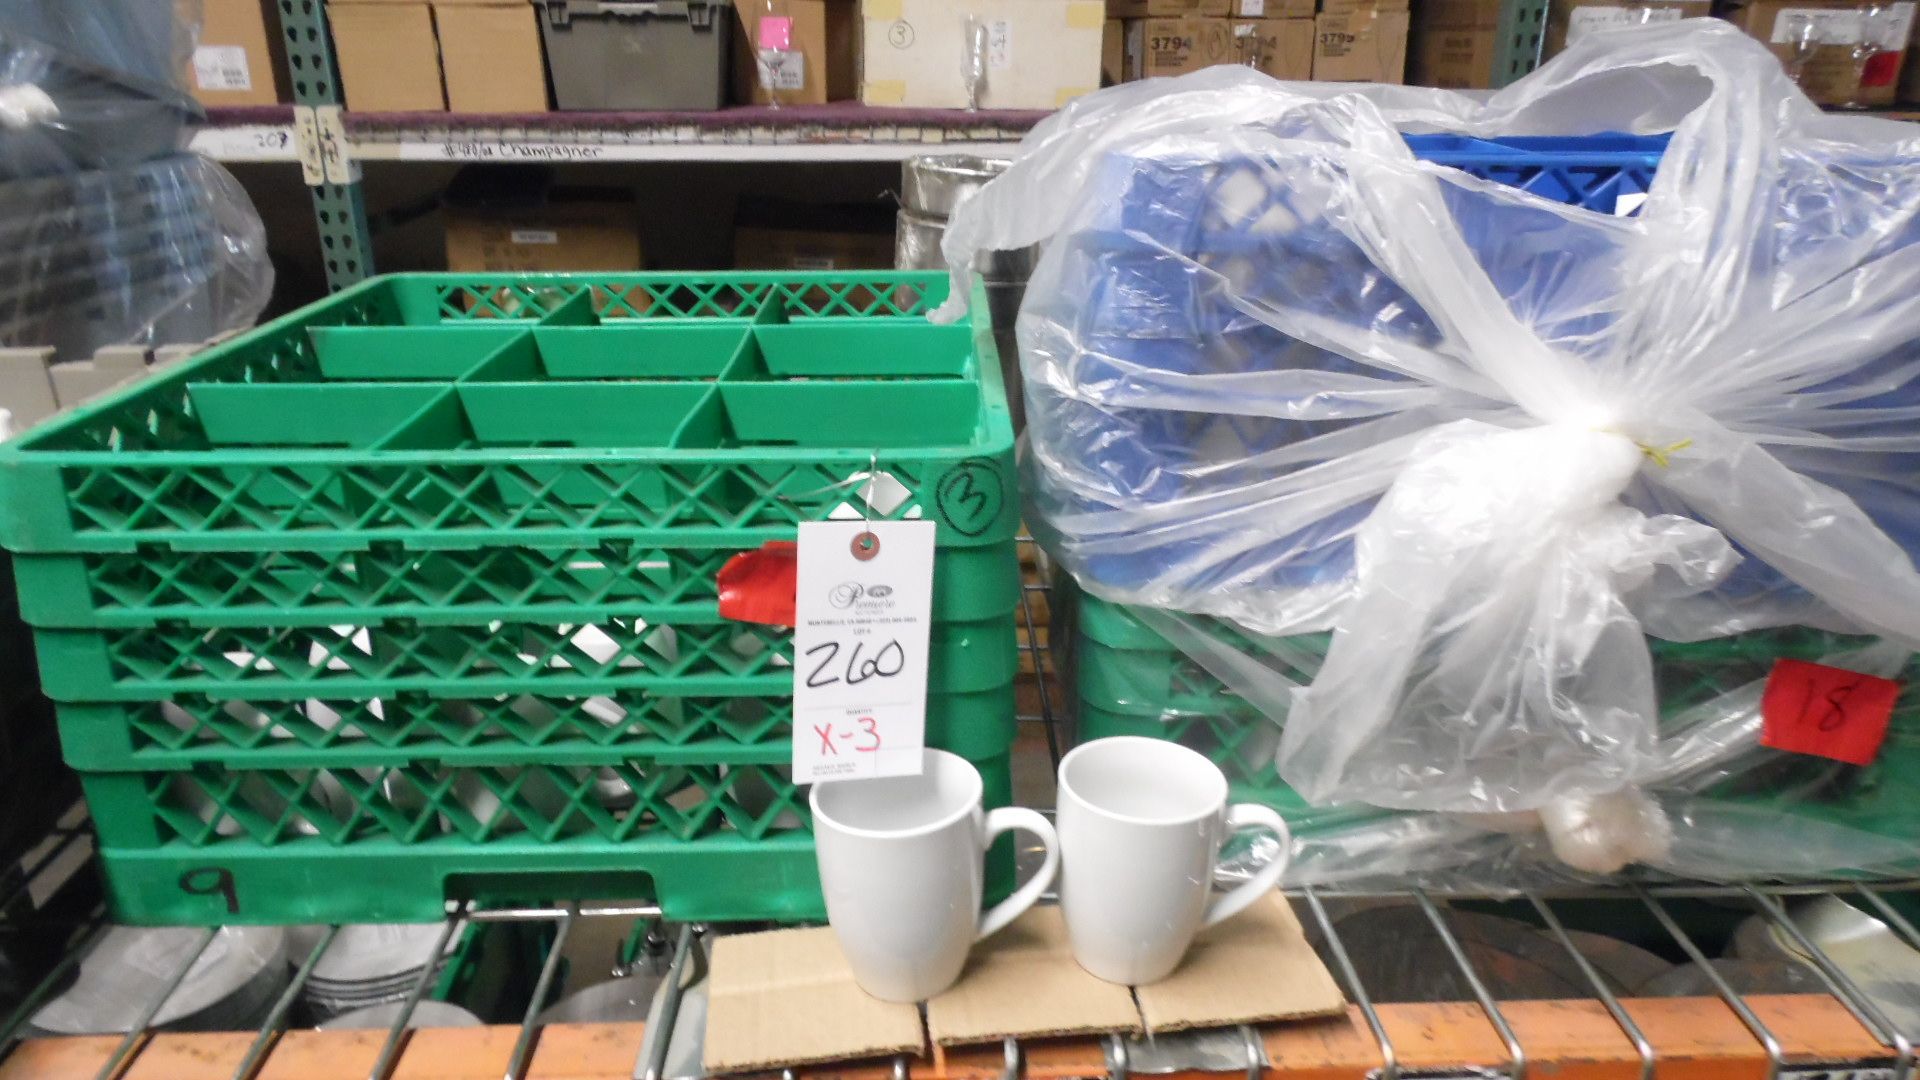 CASES OF COFFEE CUPS